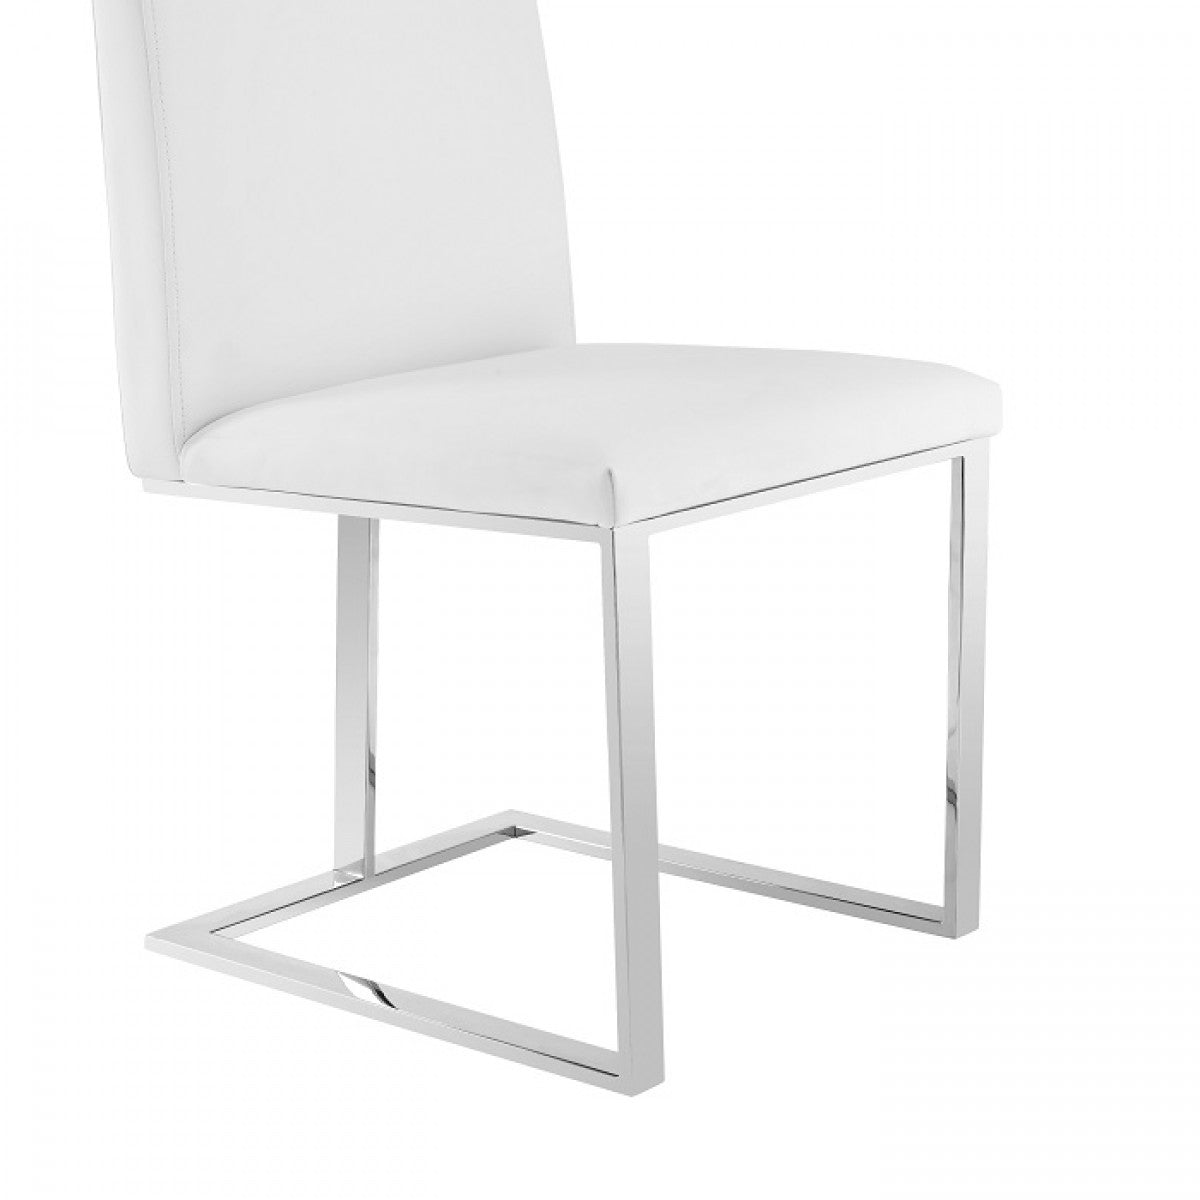 Modrest Frankie - Modern White & Brushed Stainless Steel Dining Chair